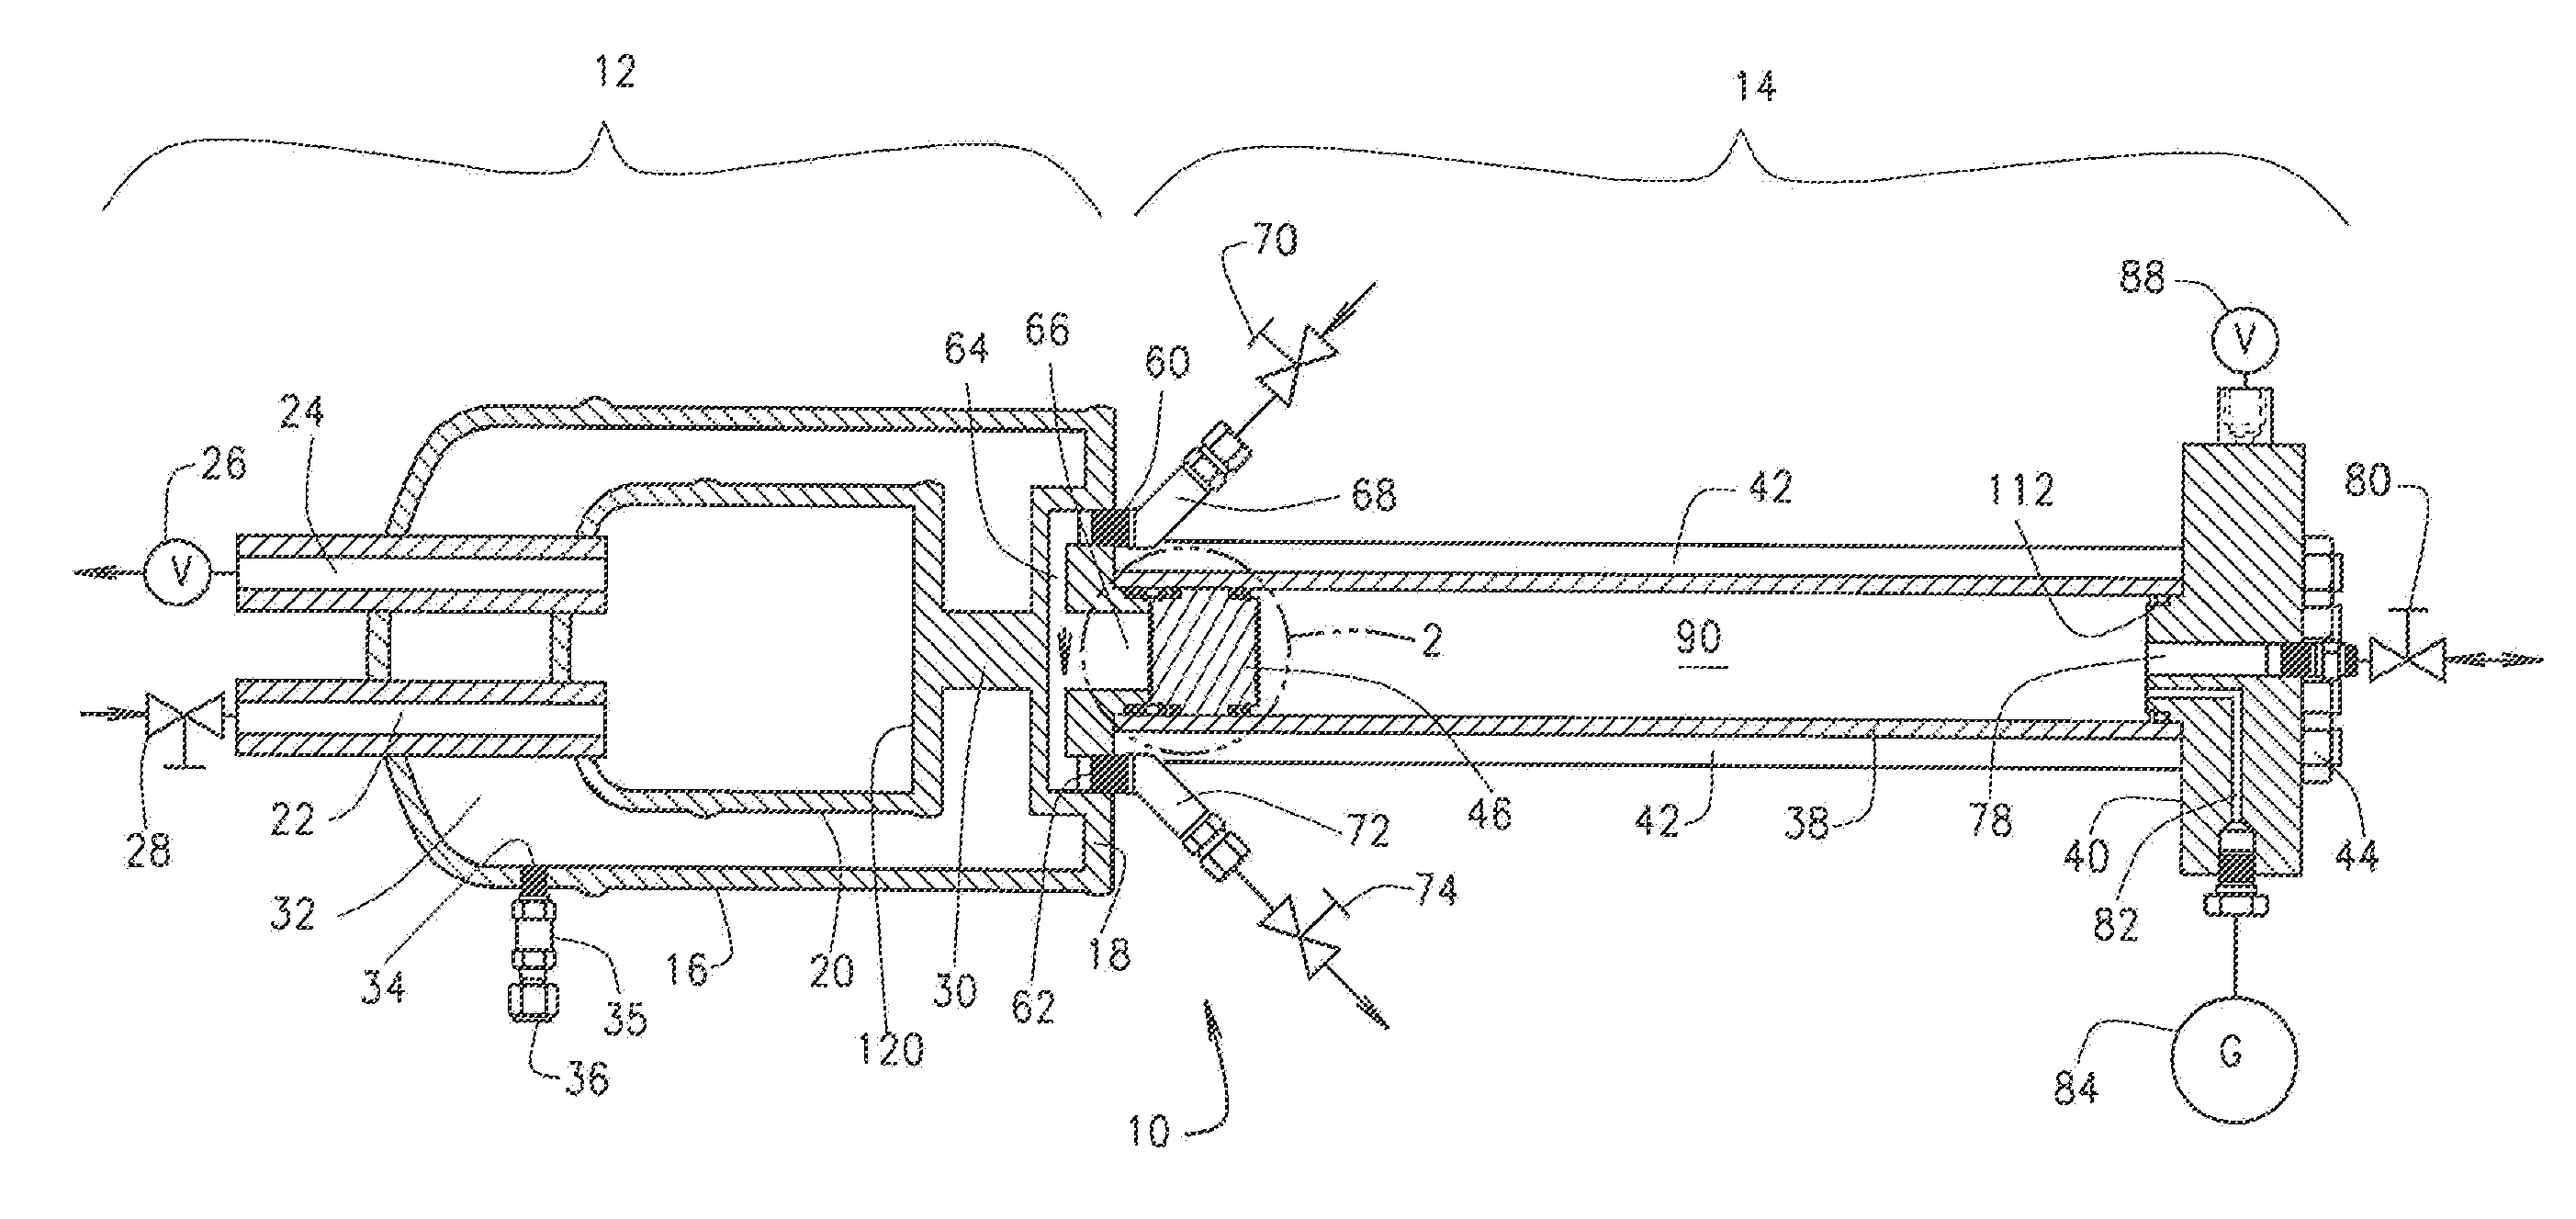 Transportable liquid phase LNG sample apparatus and method